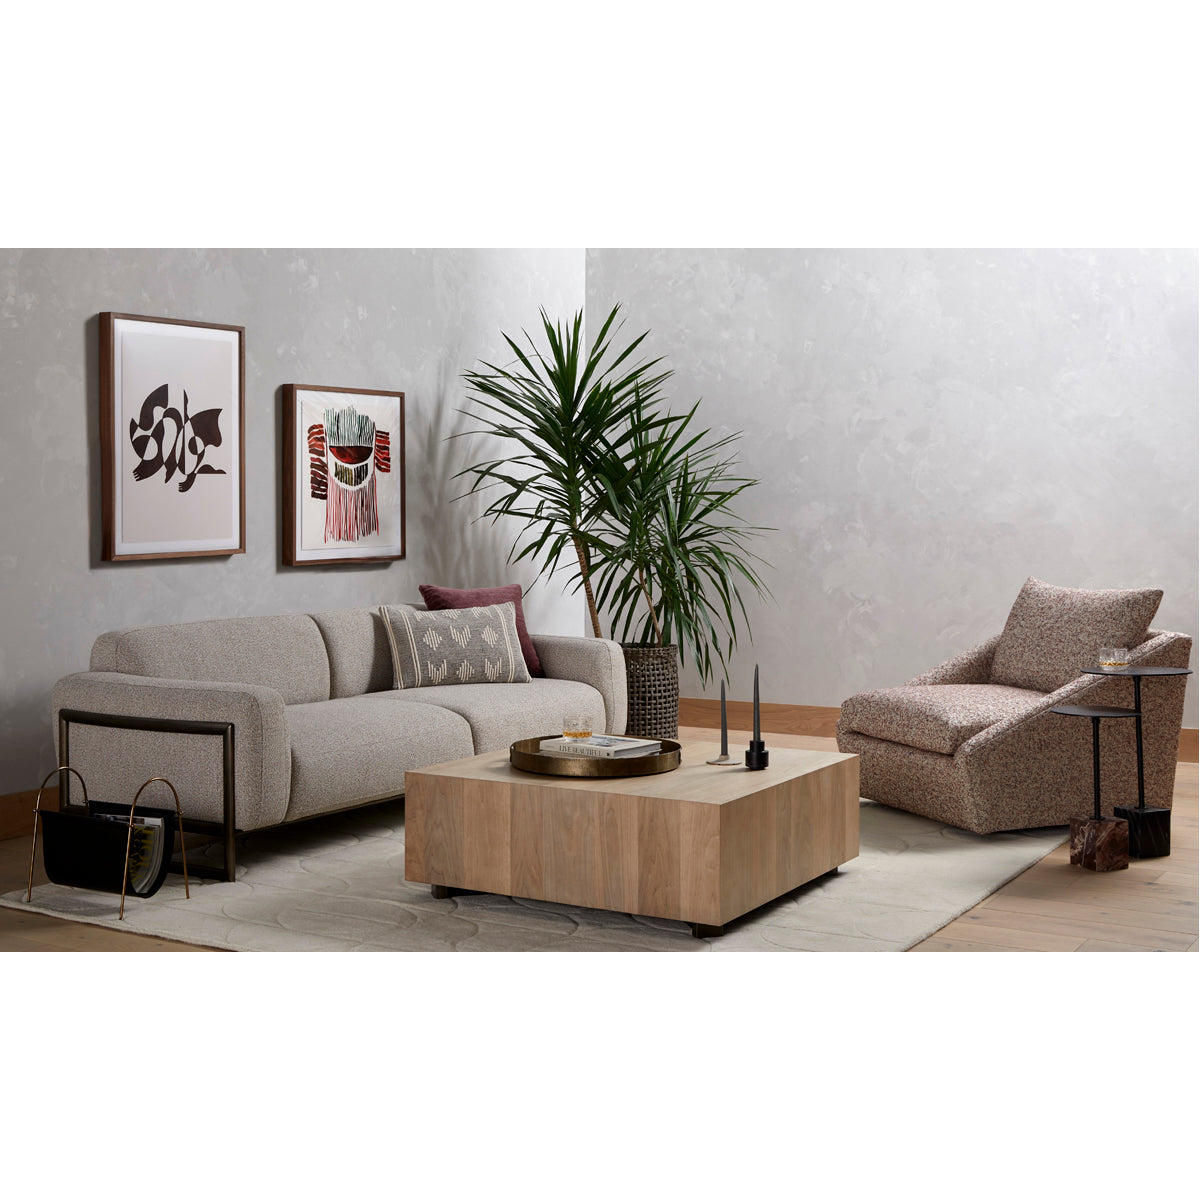 Four Hands Wesson Hudson Square Coffee Table - Ashen Walnut